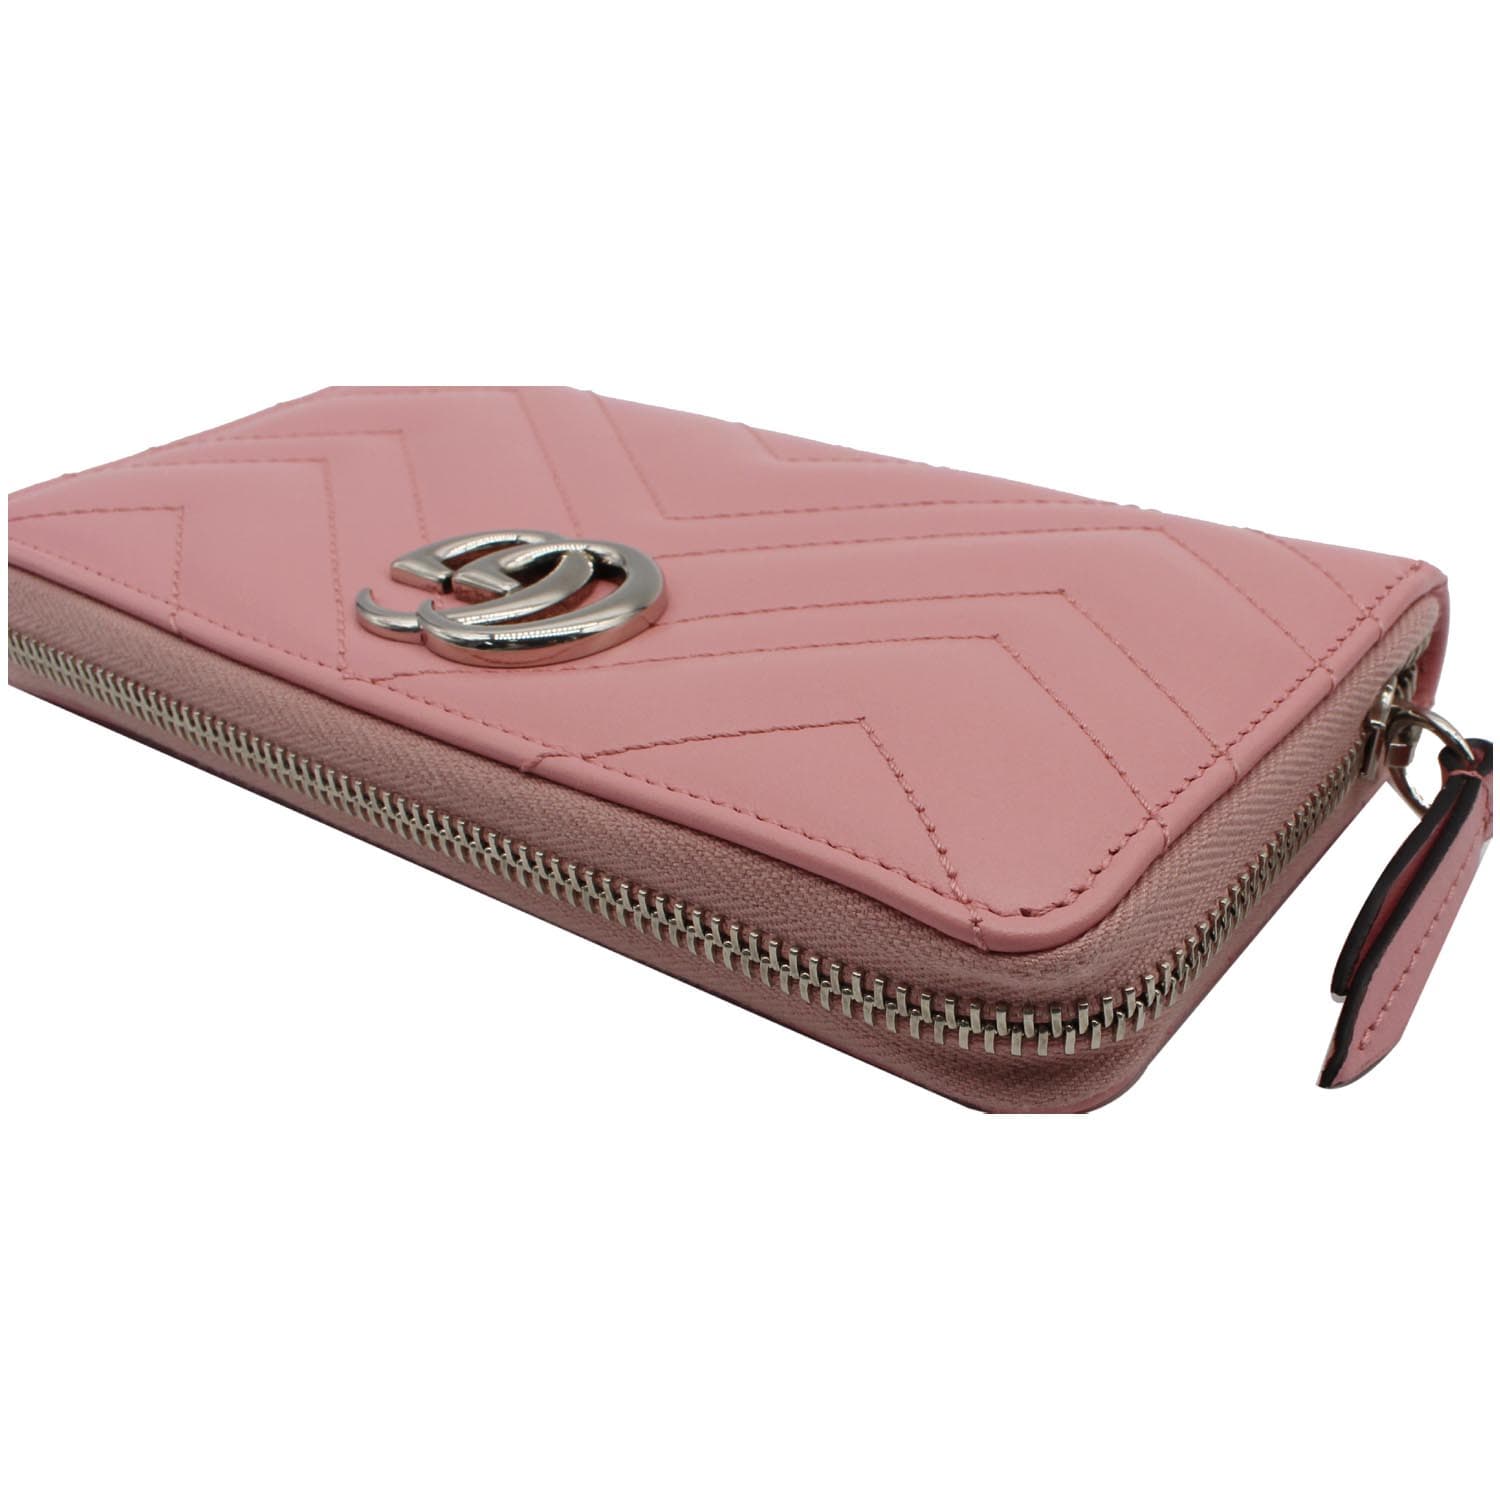 GG Marmont matelassé card case wallet in light pink leather